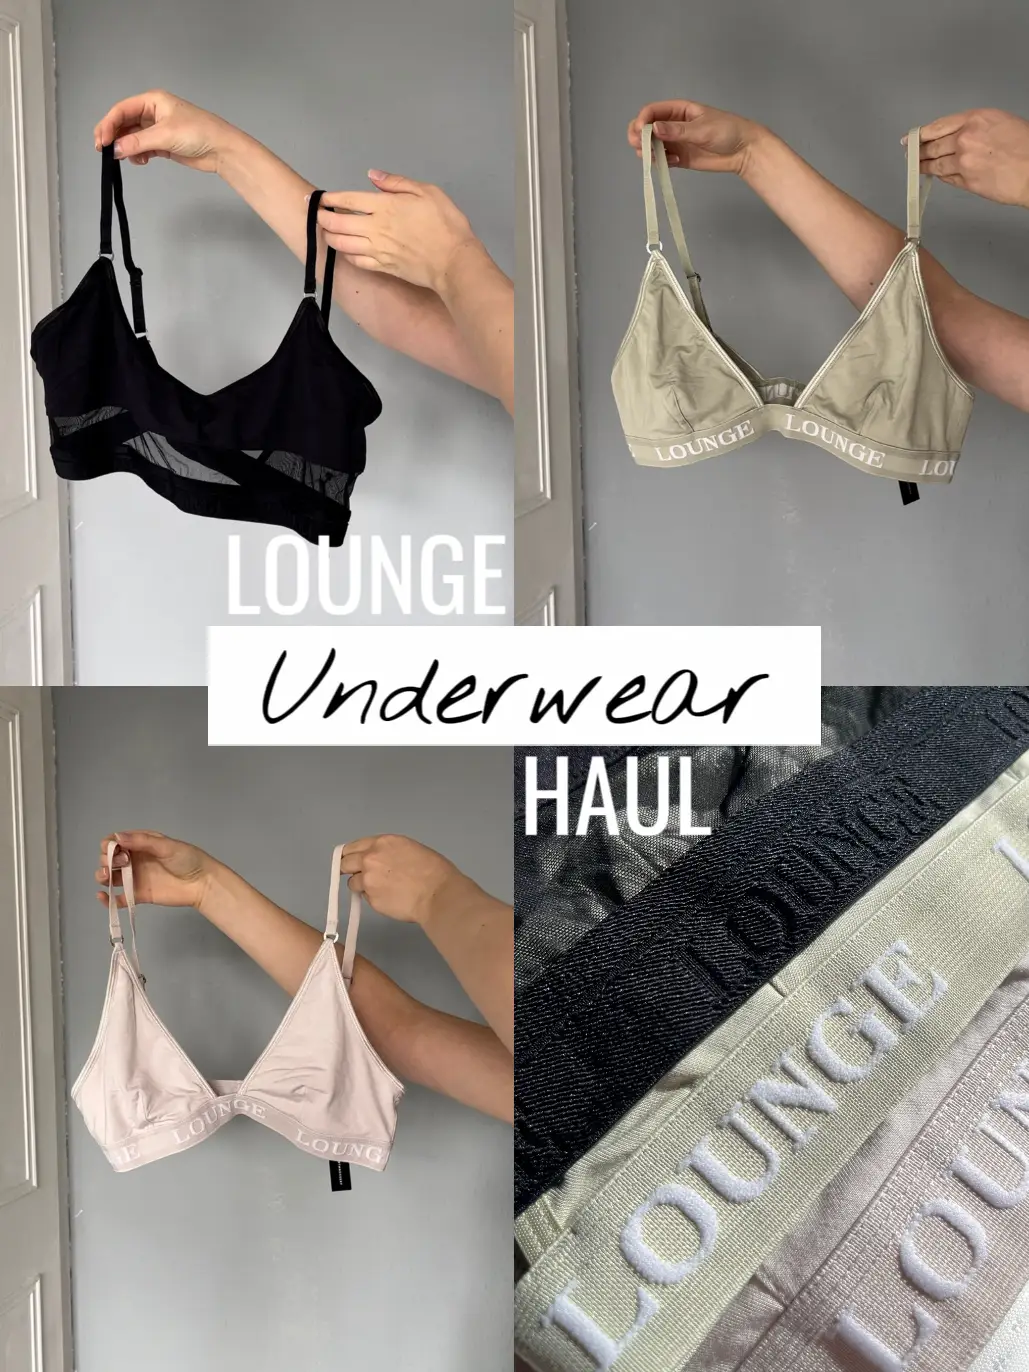 A review on lounge underwear, Gallery posted by Elena Impieri